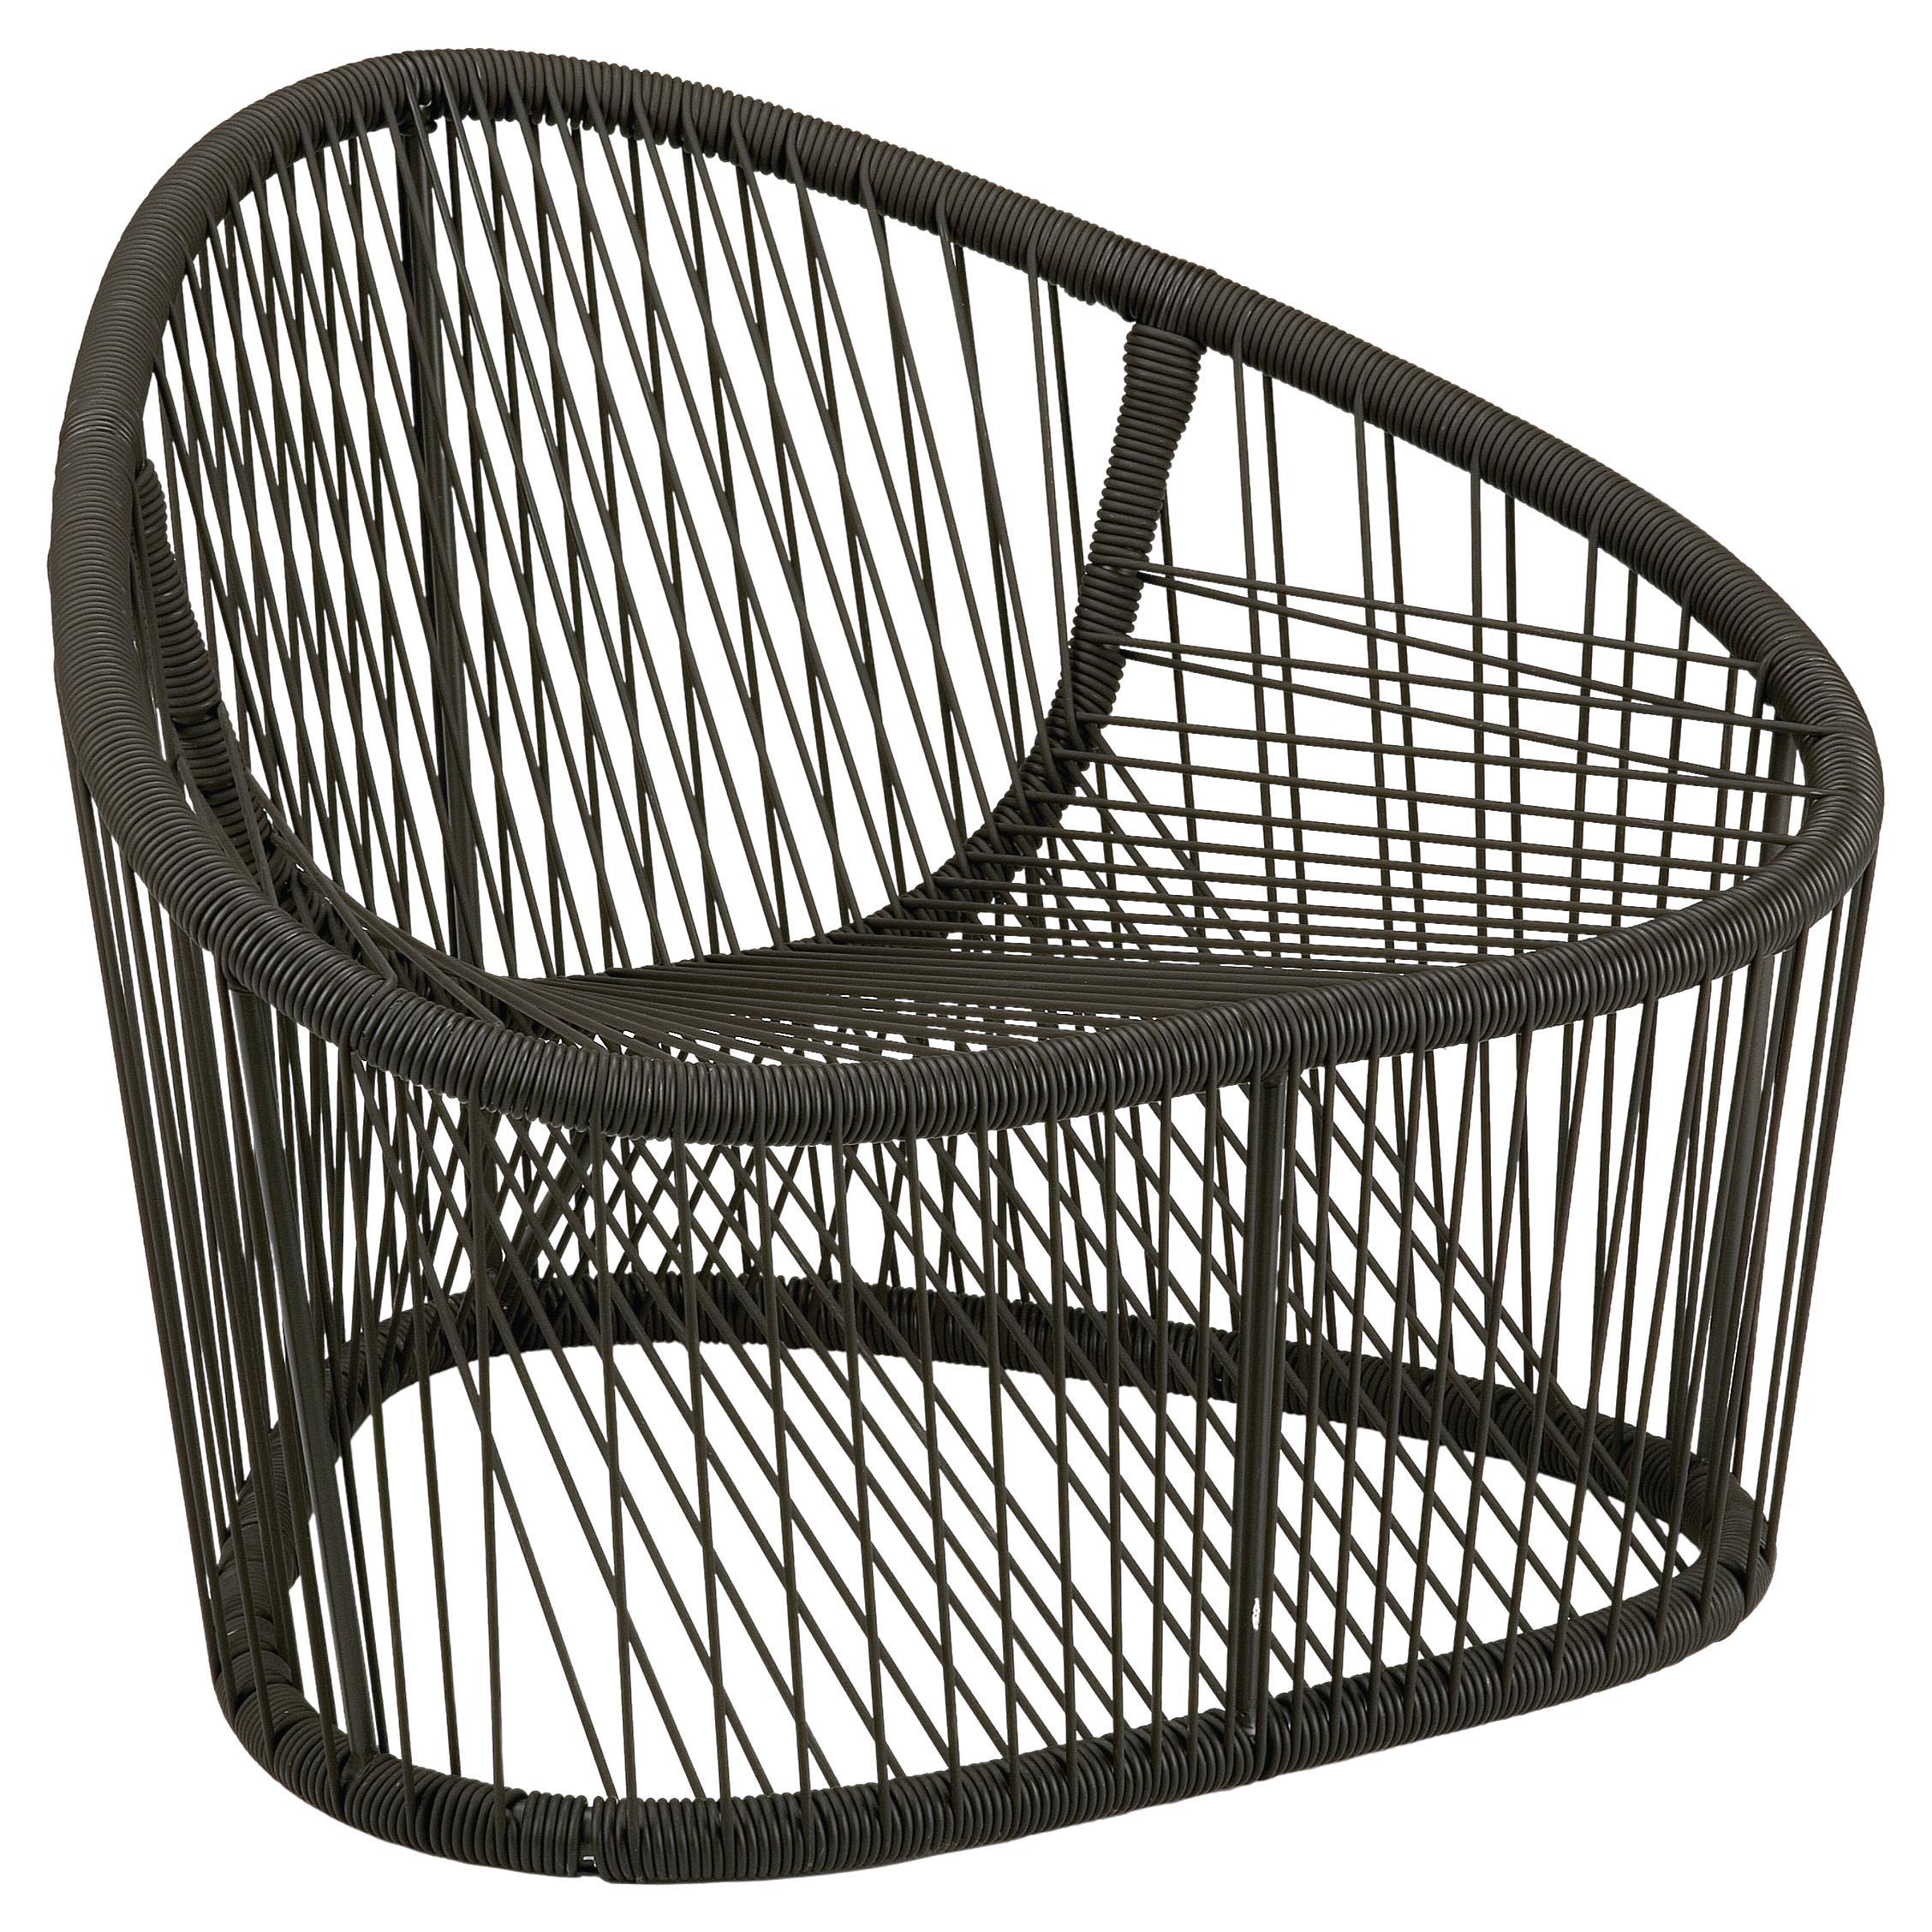 Zanotta 1009 Club Chair for Indoor or Outdoor Designed by Prospero Rasulo For Sale